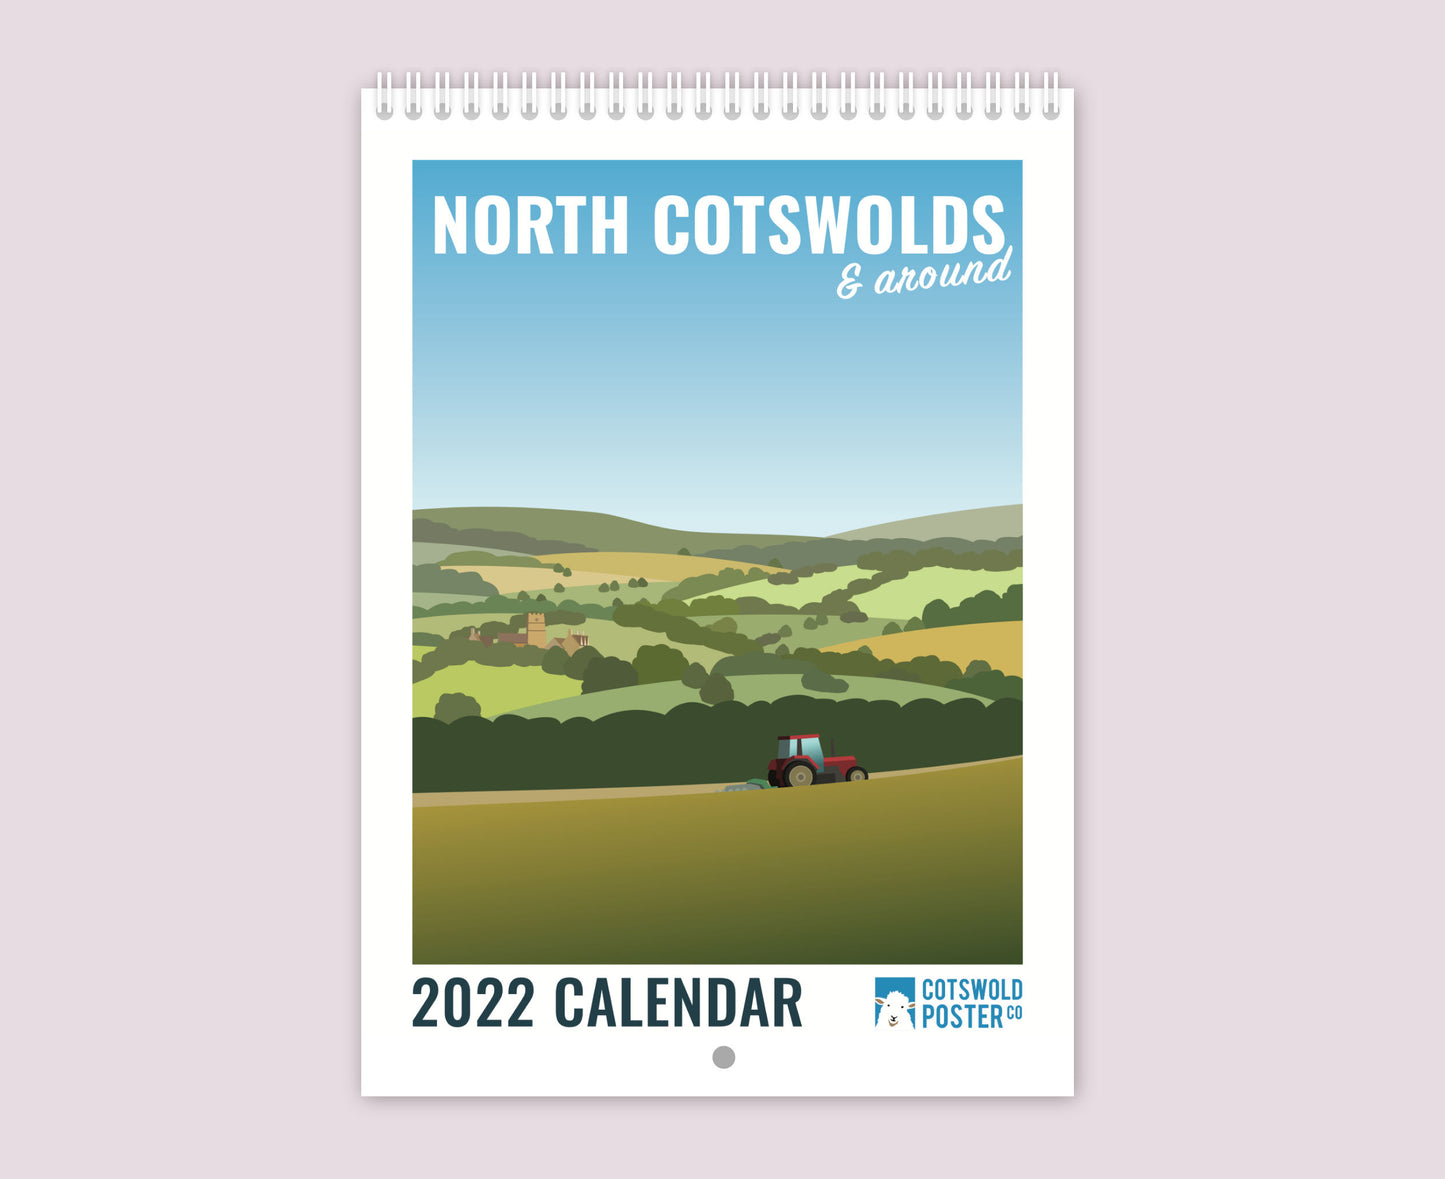 North Cotswolds 2022 Calendar front cover